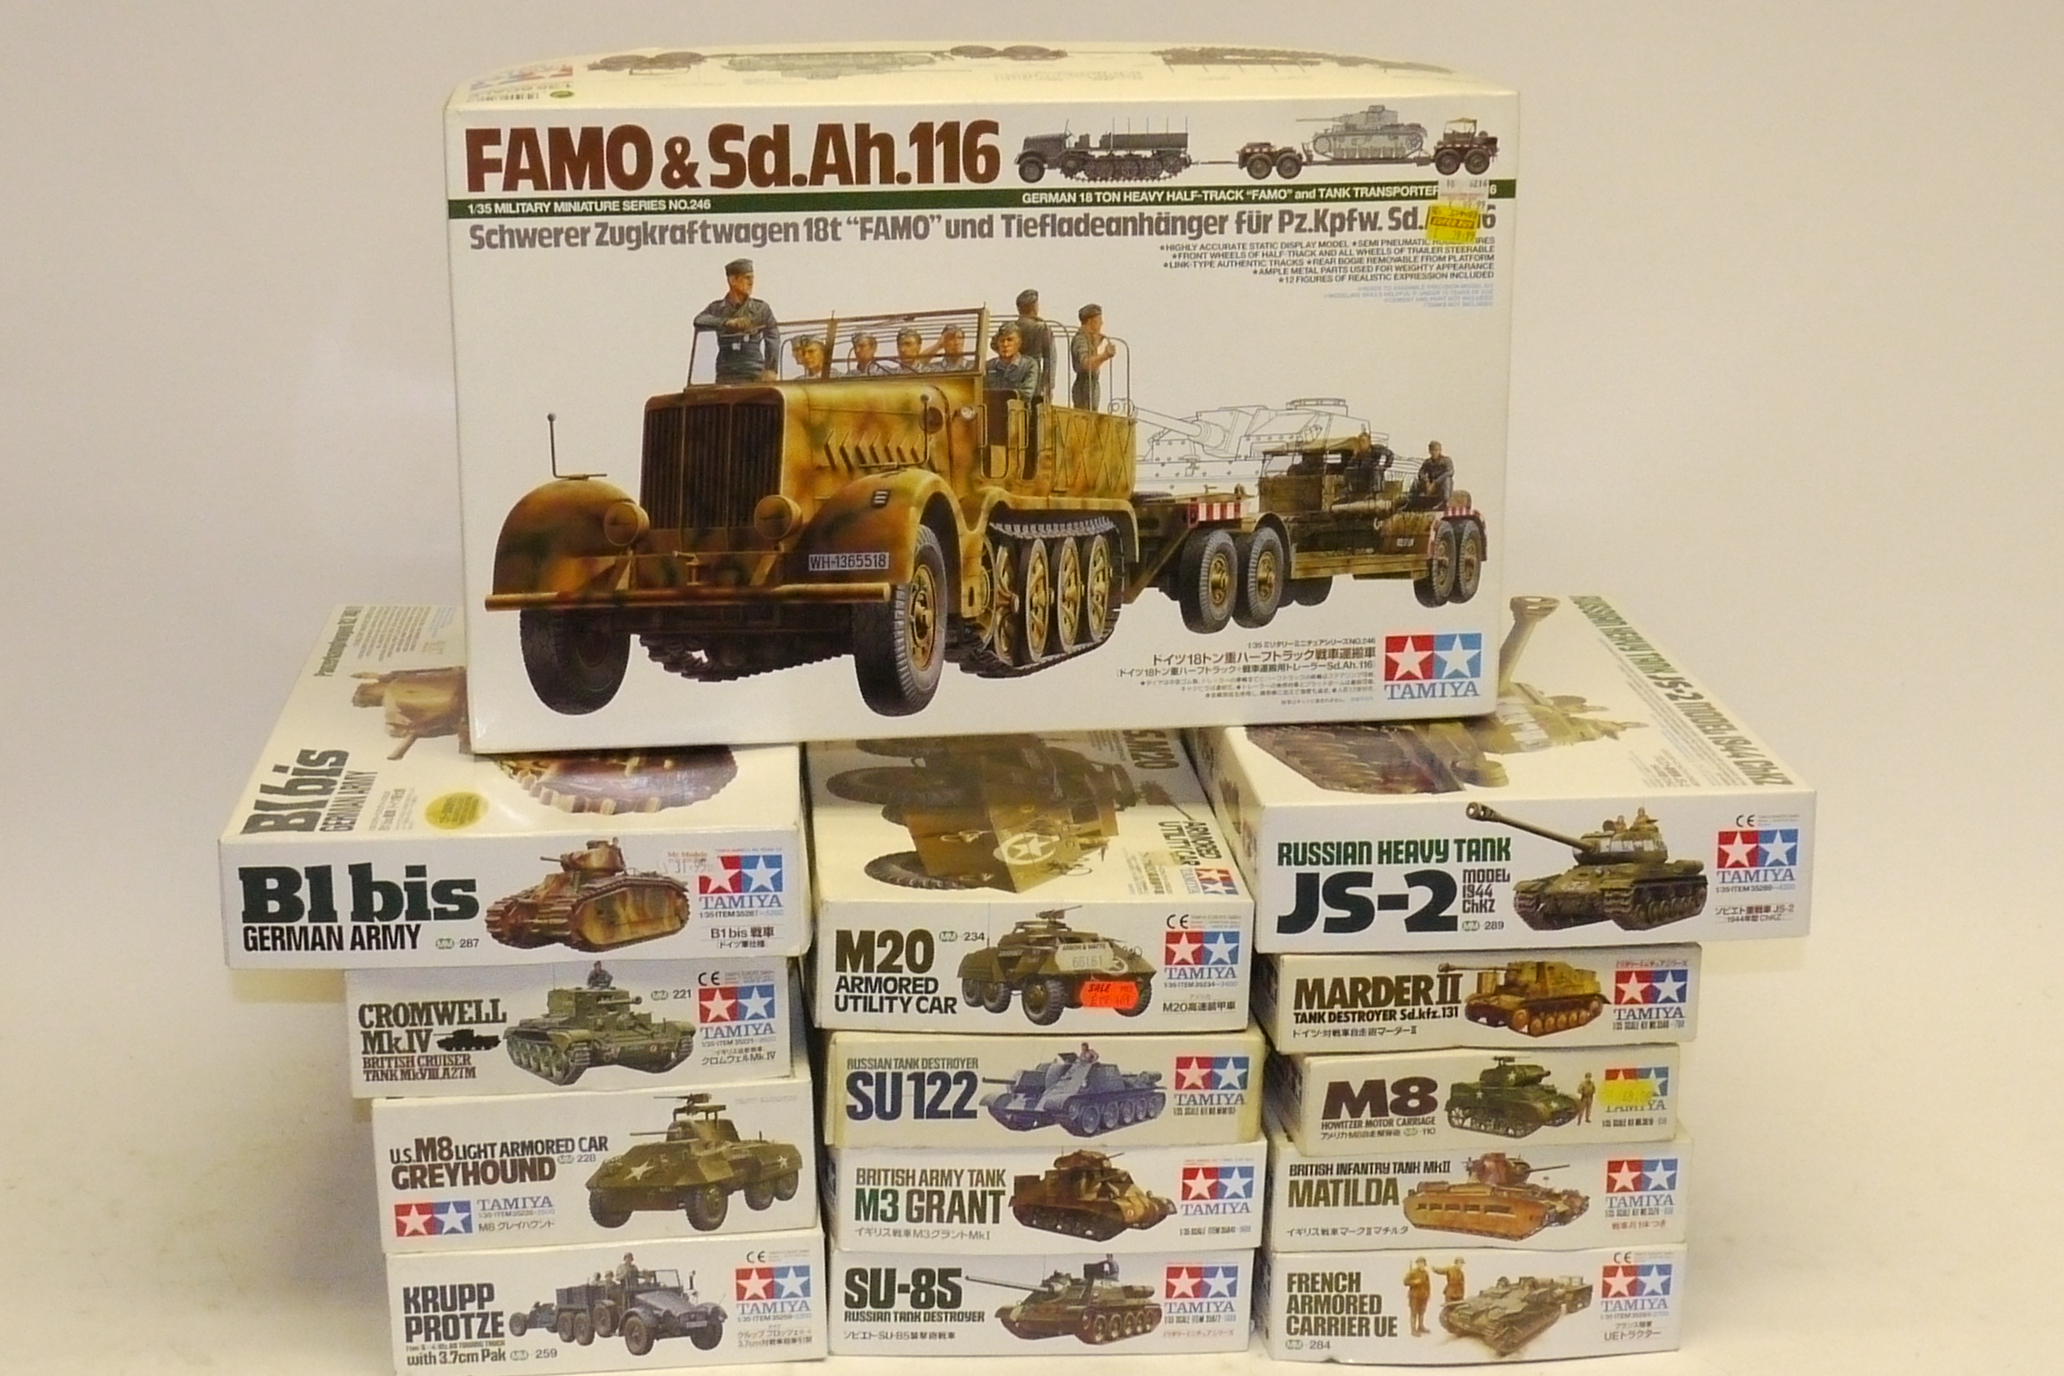 Tamiya Military Model Kits, A boxed collection of 1:35 scale German and Allied world war II military